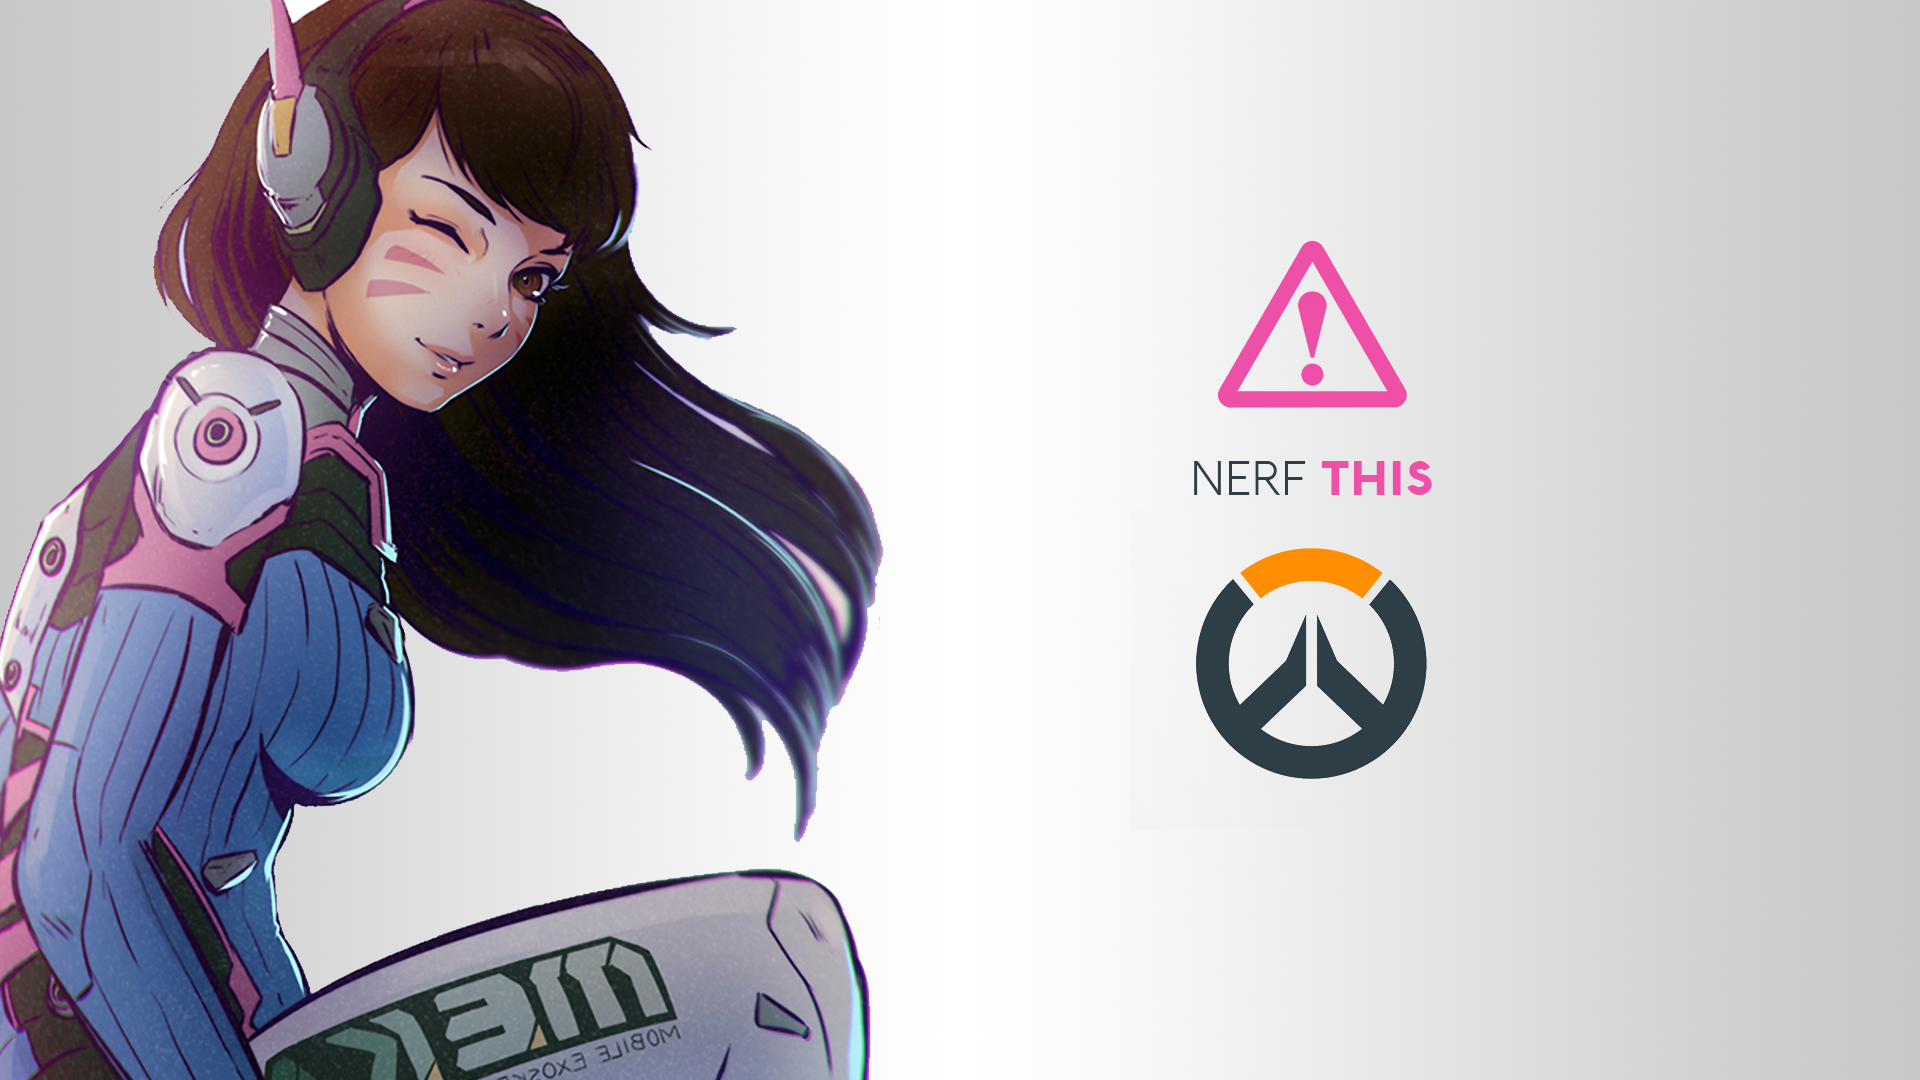 General 1920x1080 Blizzard Entertainment Overwatch video games logo DXHHH101 (Author) D.Va (Overwatch) women video game characters one eye closed video game girls white background long hair brunette PC gaming